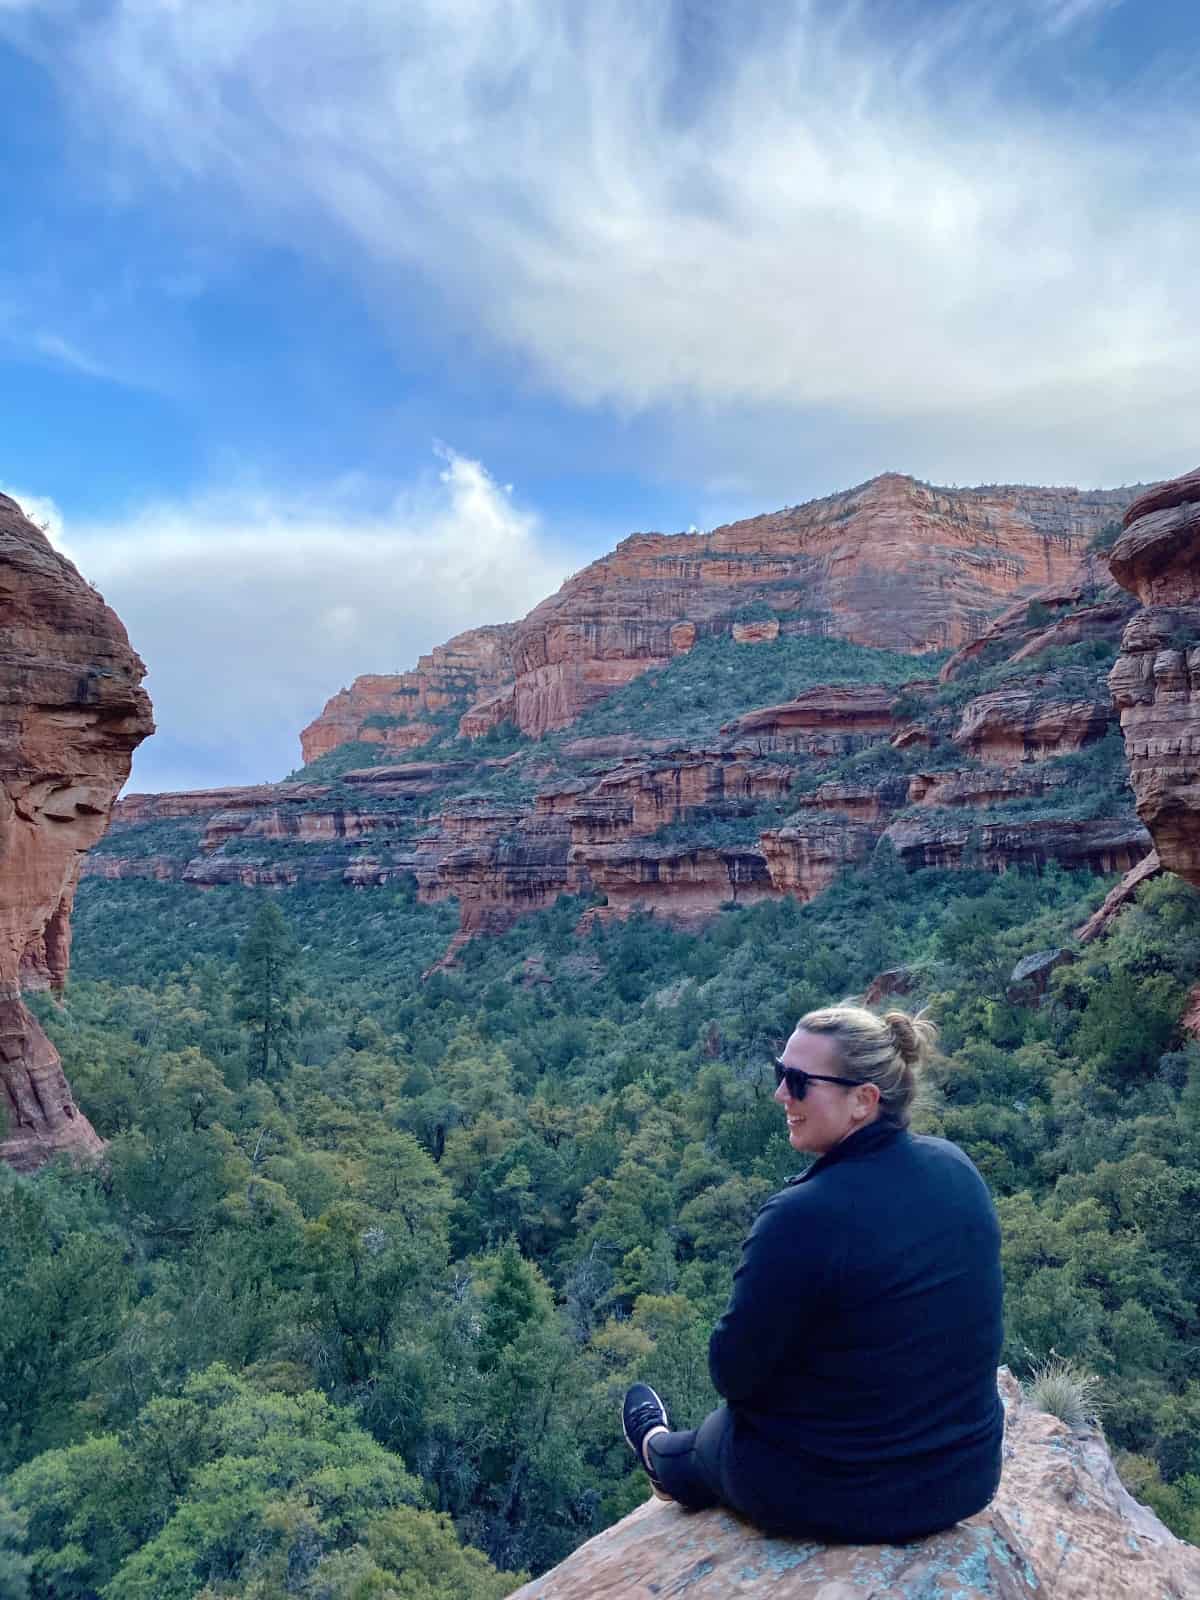 What to Do in Sedona: An In-Depth Guide for Planning Your Sedona Itinerary | The beautiful desert landscapes of Sedona, Arizona, have become a huge destination in recent years, so I have a detailed guide with lots of tips for things to do in Sedona & how to have the best trip. Sedona what to do, Sedona trip ideas, Arizona trip planning ideas, Sedona hiking, where to eat in Sedona, where to stay & more! #sedona #arizona #usatravel #hiking